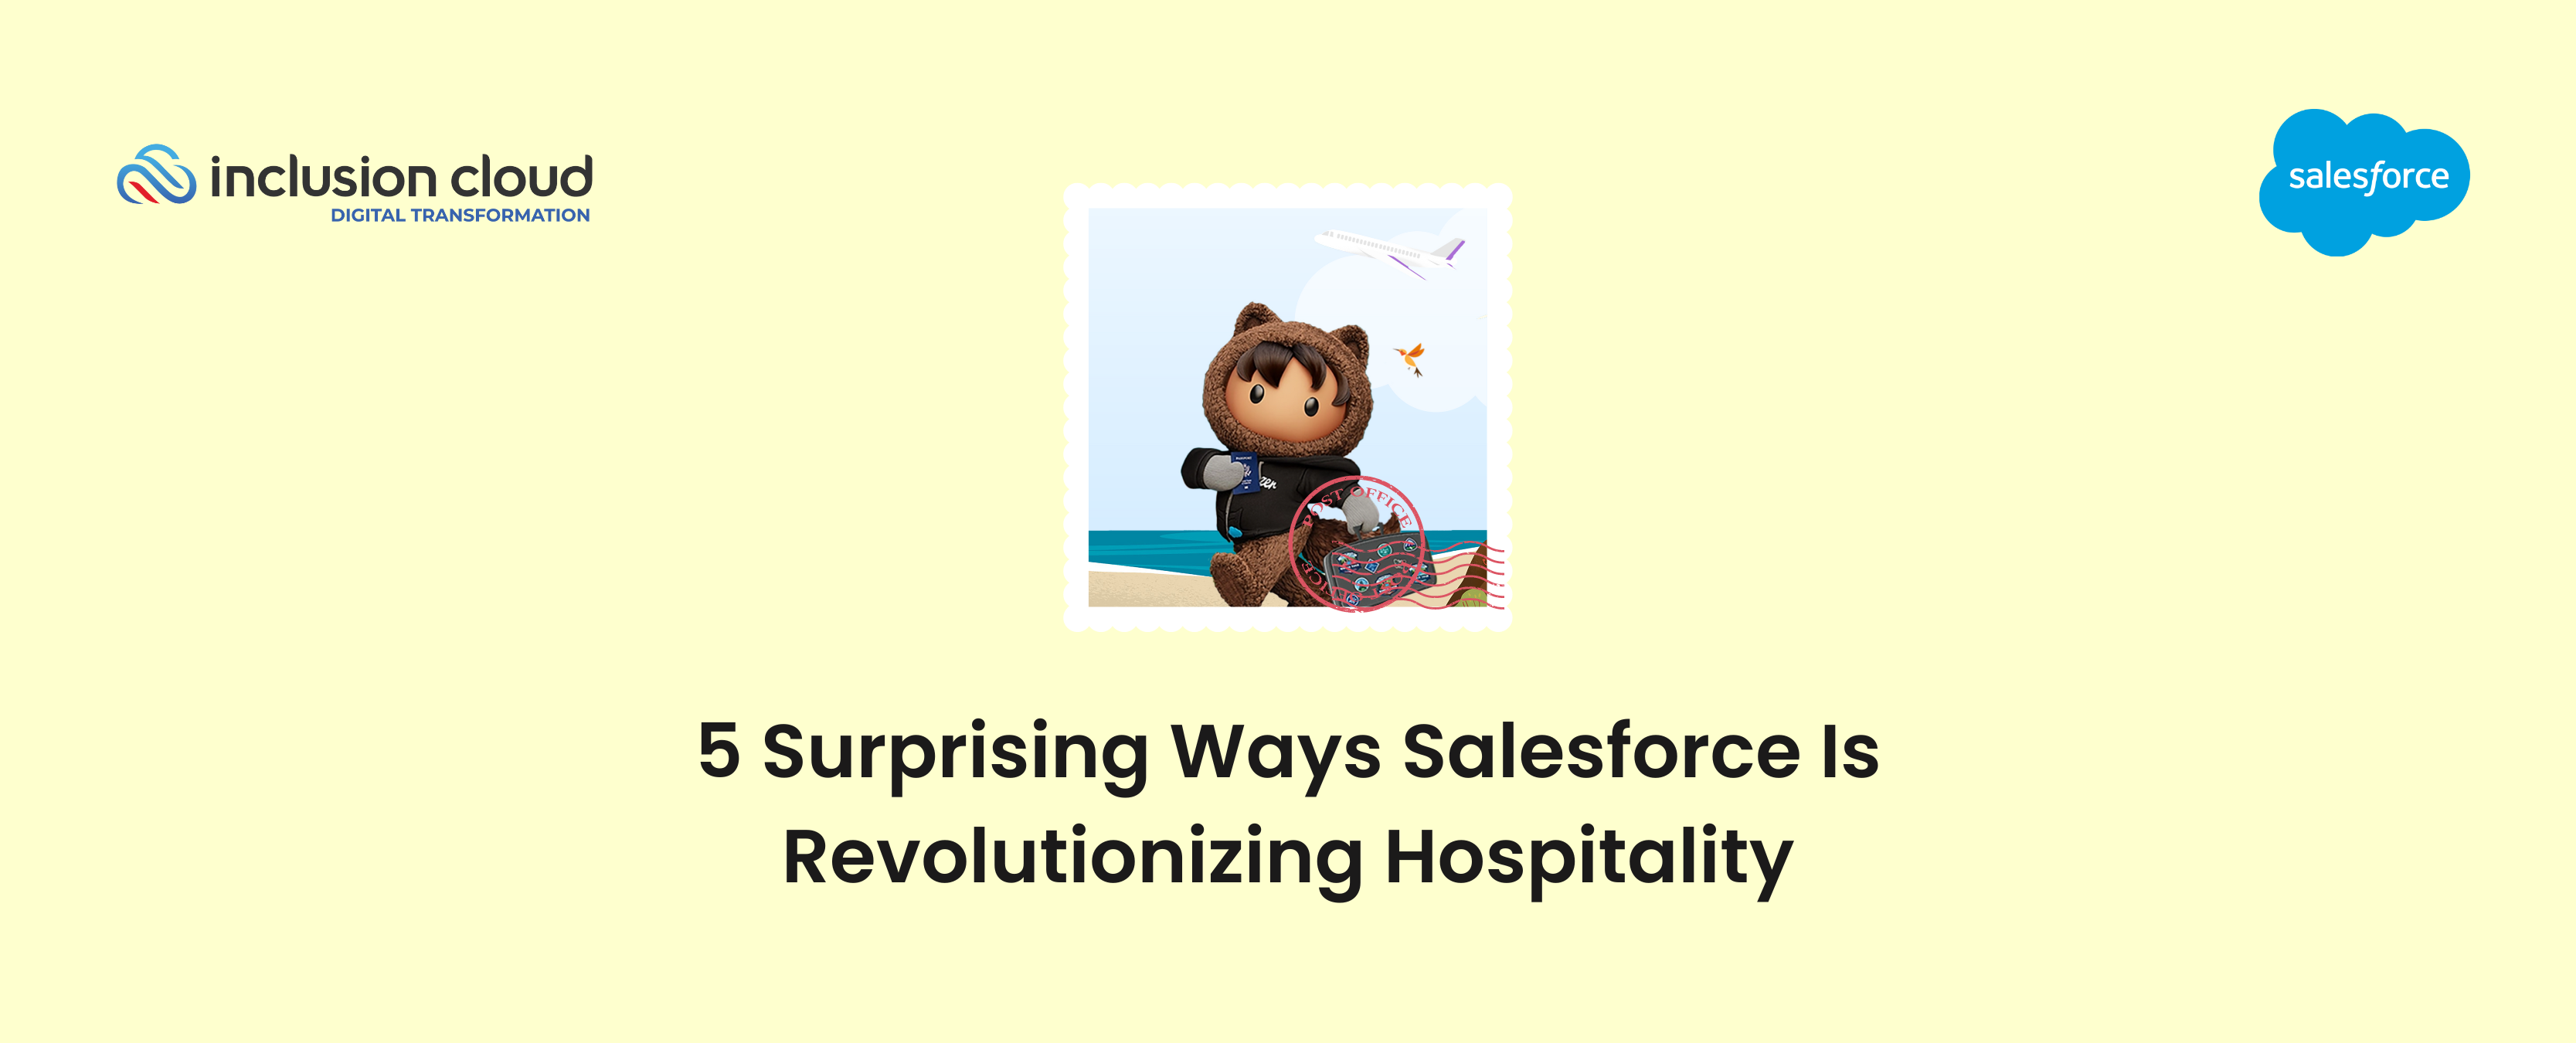 5 Surprising Ways Salesforce Is Revolutionizing the Hospitality Industry